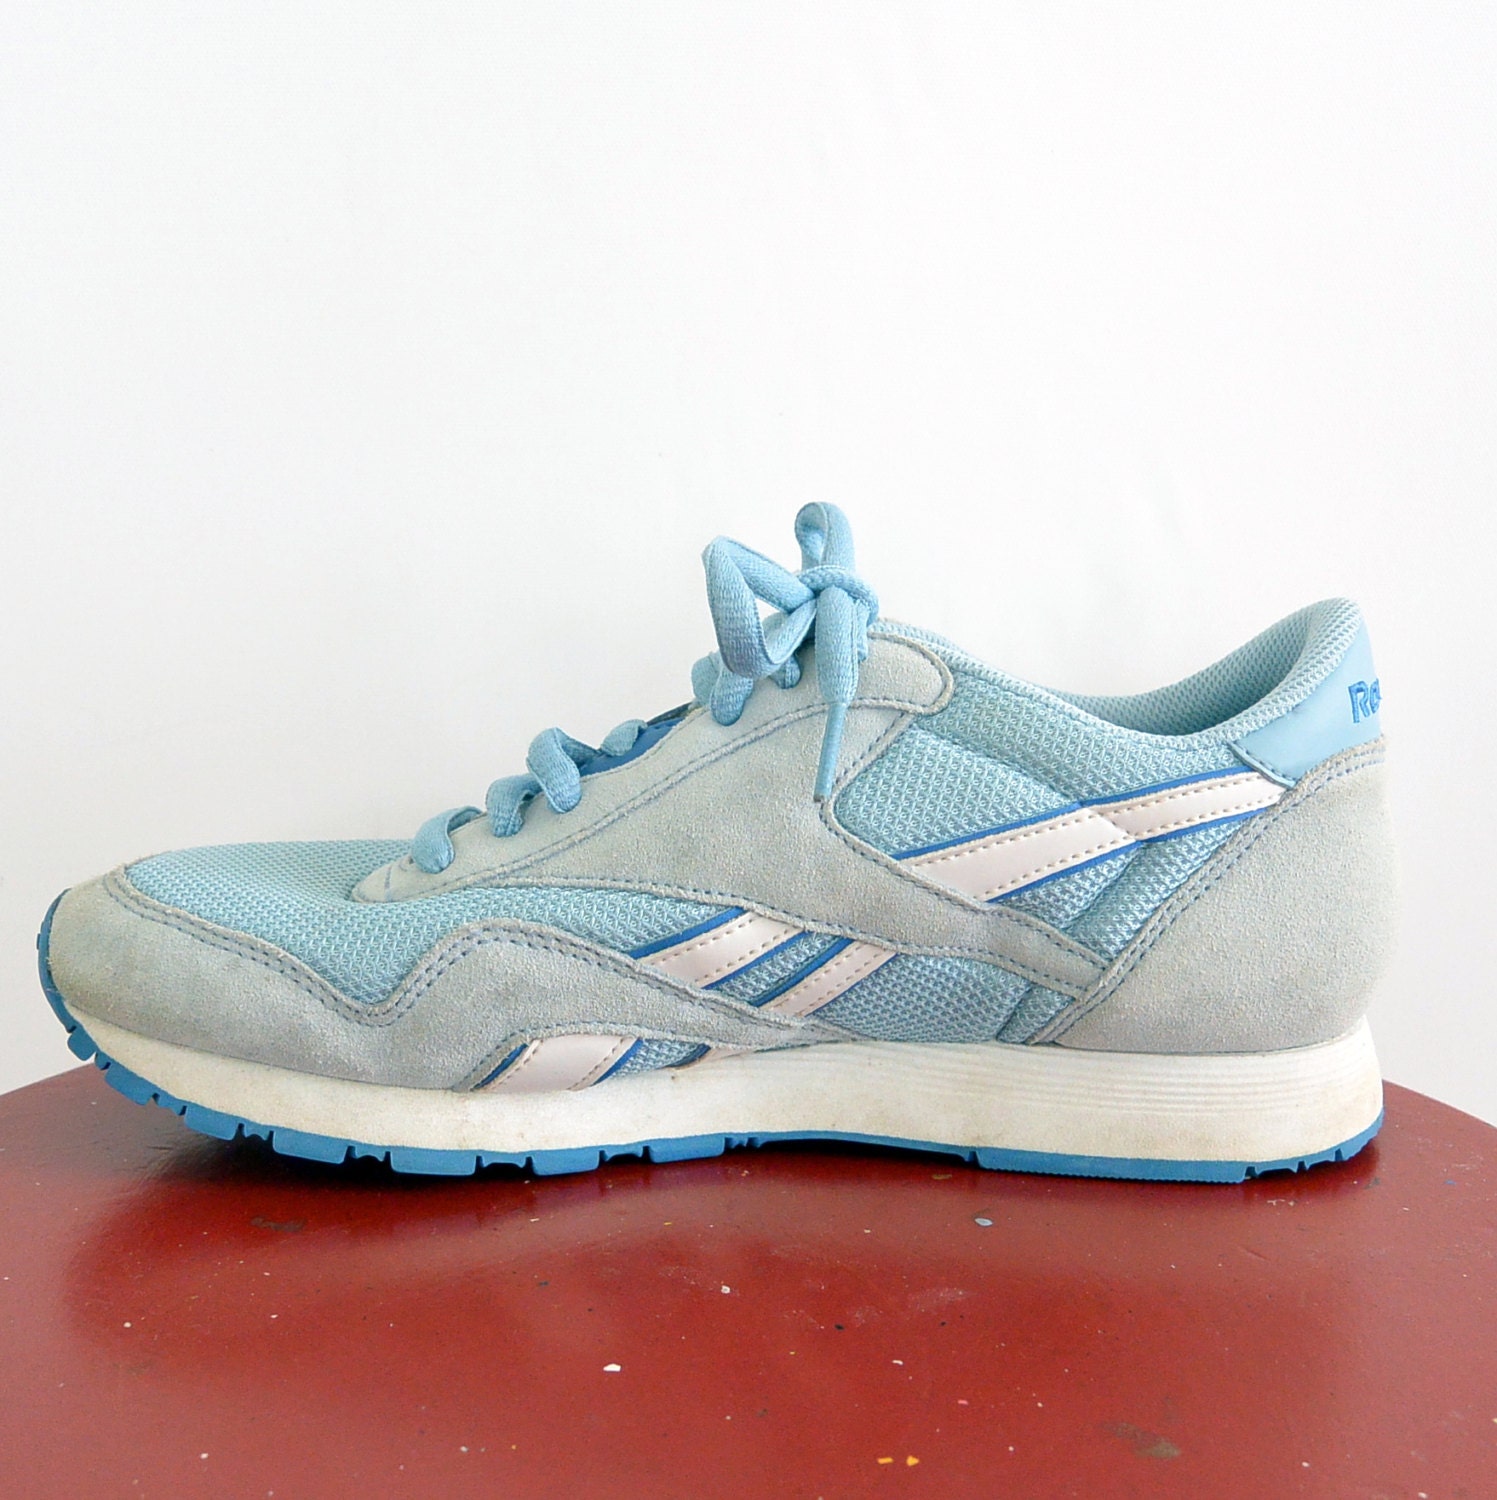 Classic Reebok Sneakers Running Shoes Light Blue Suede/Nylon